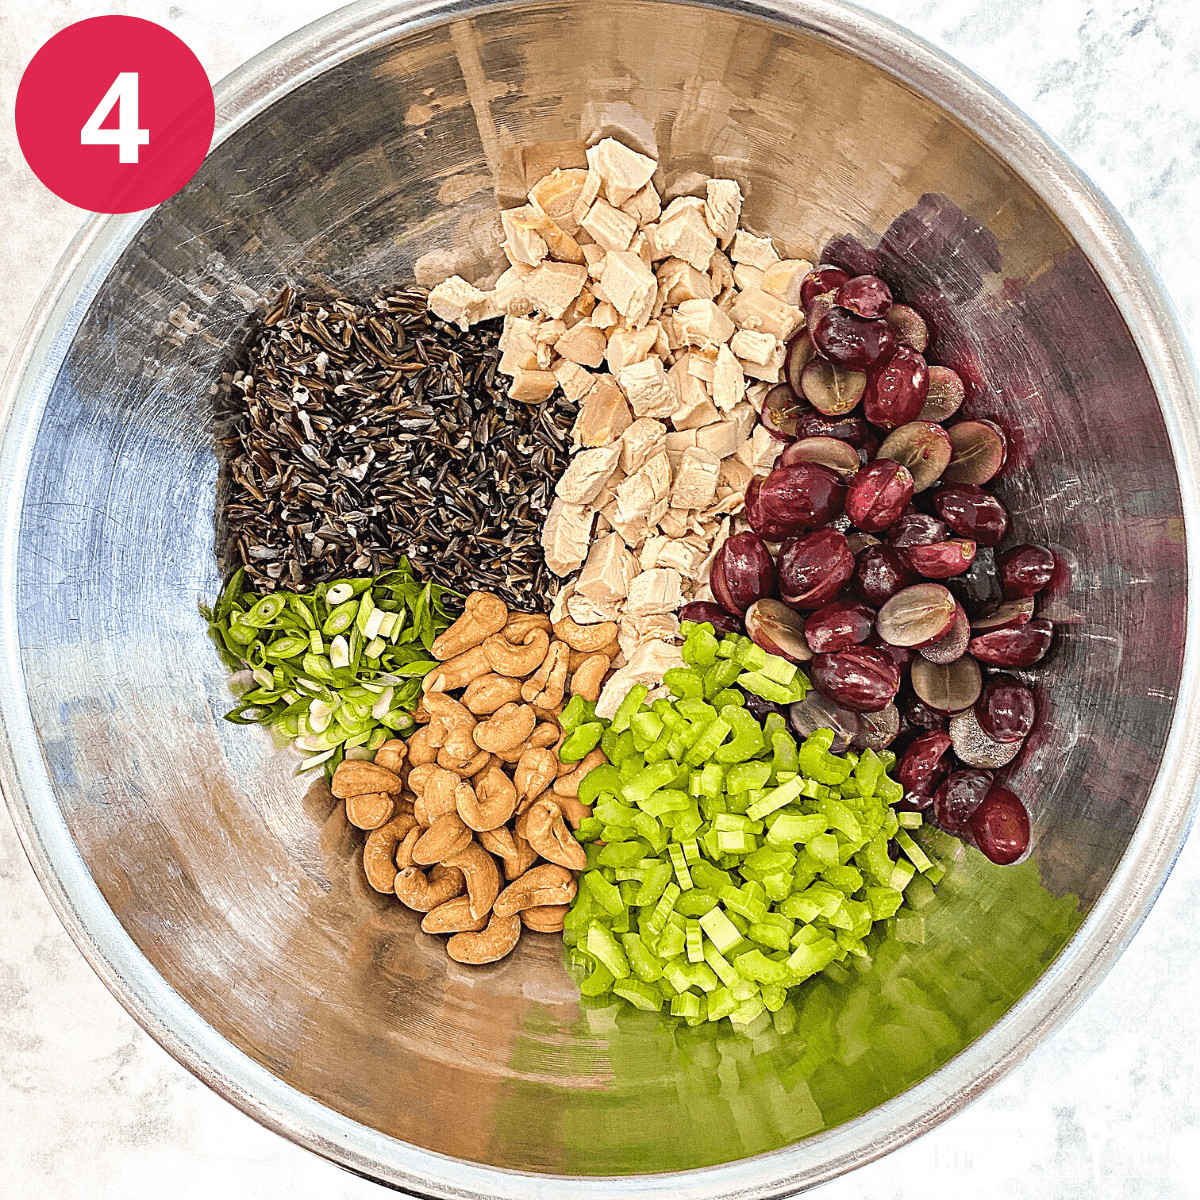 The salad ingredients in a large bowl: wild rice, cubed cooked chicken, halved red grapes, chopped celery, whole cashews, and slice green onions.